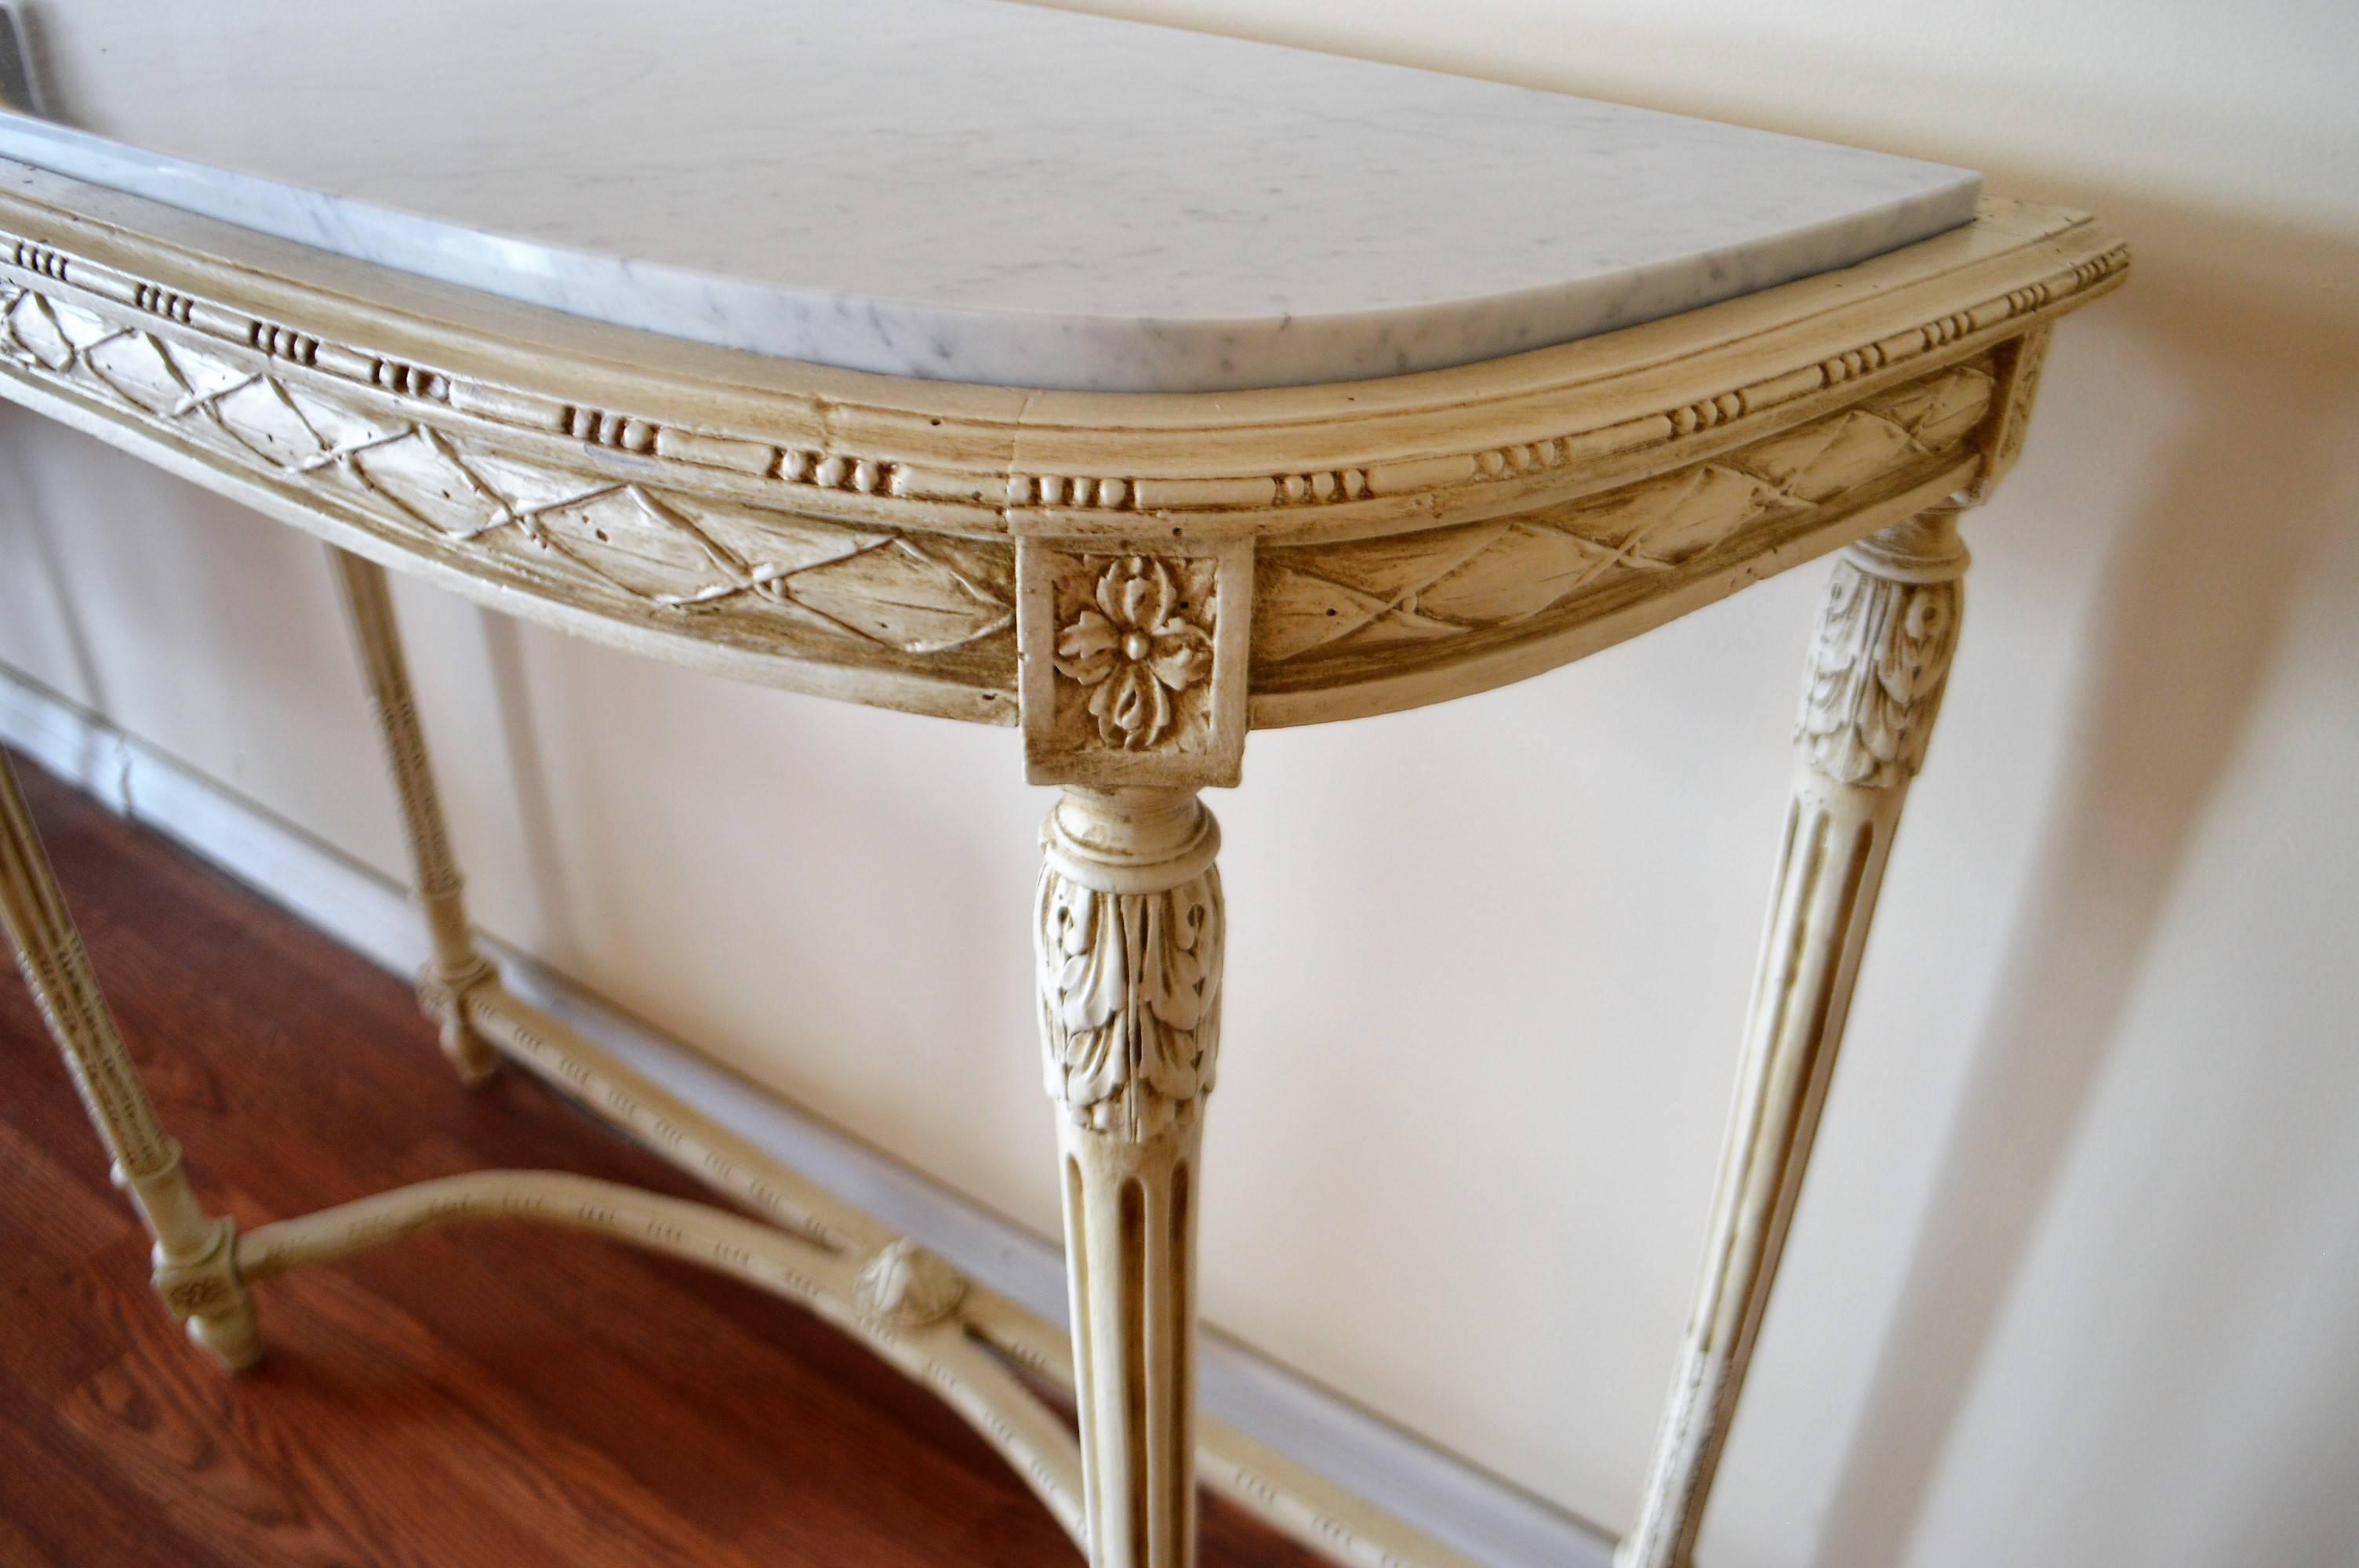 Louis XVI style console table, was painted in a cream tone over mahogany. The Carrara marble top is new. It has lovely hand-carved details on the apron as well as the legs. The entretoise that joins the legs is attractive as well as
giving